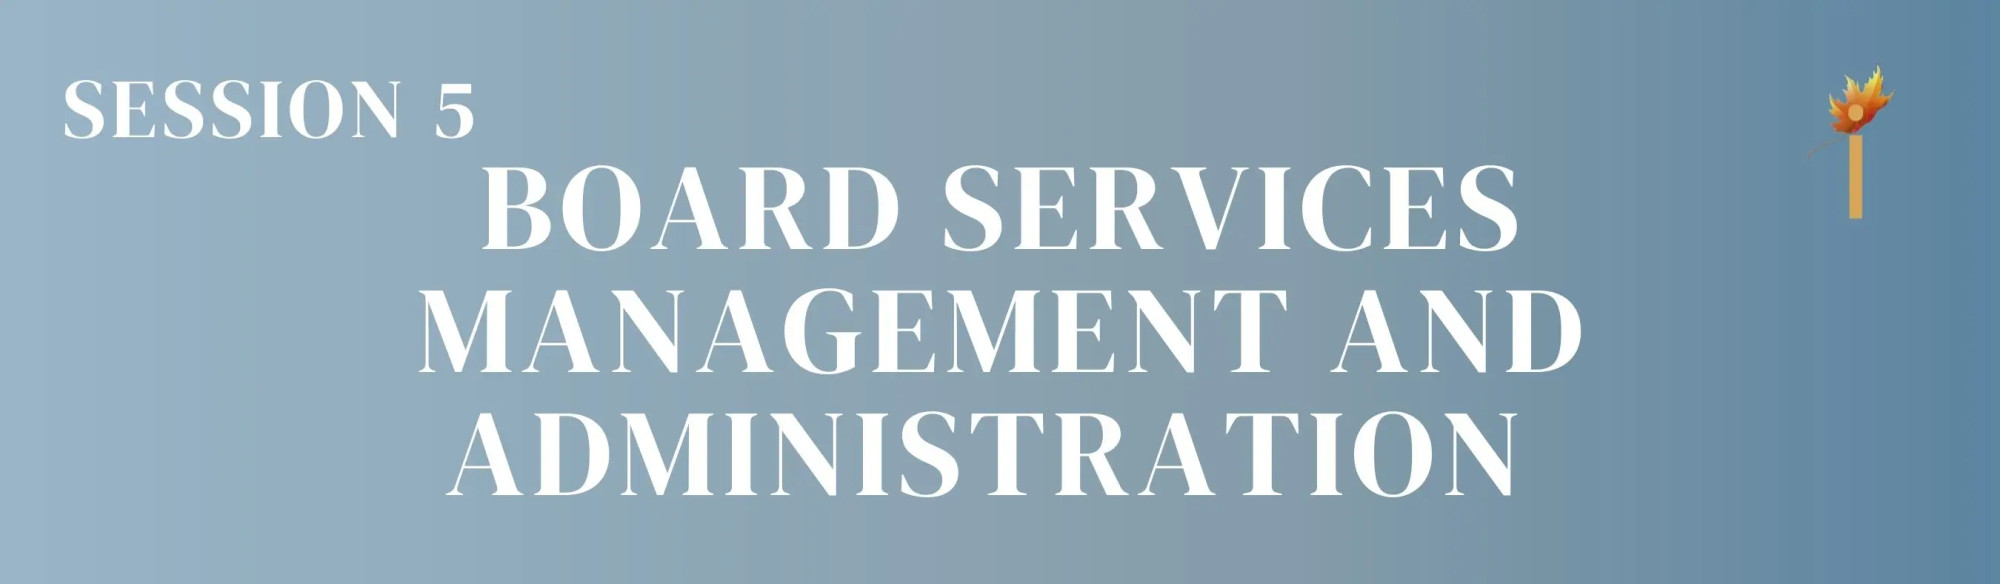 Board Services Management and Administration